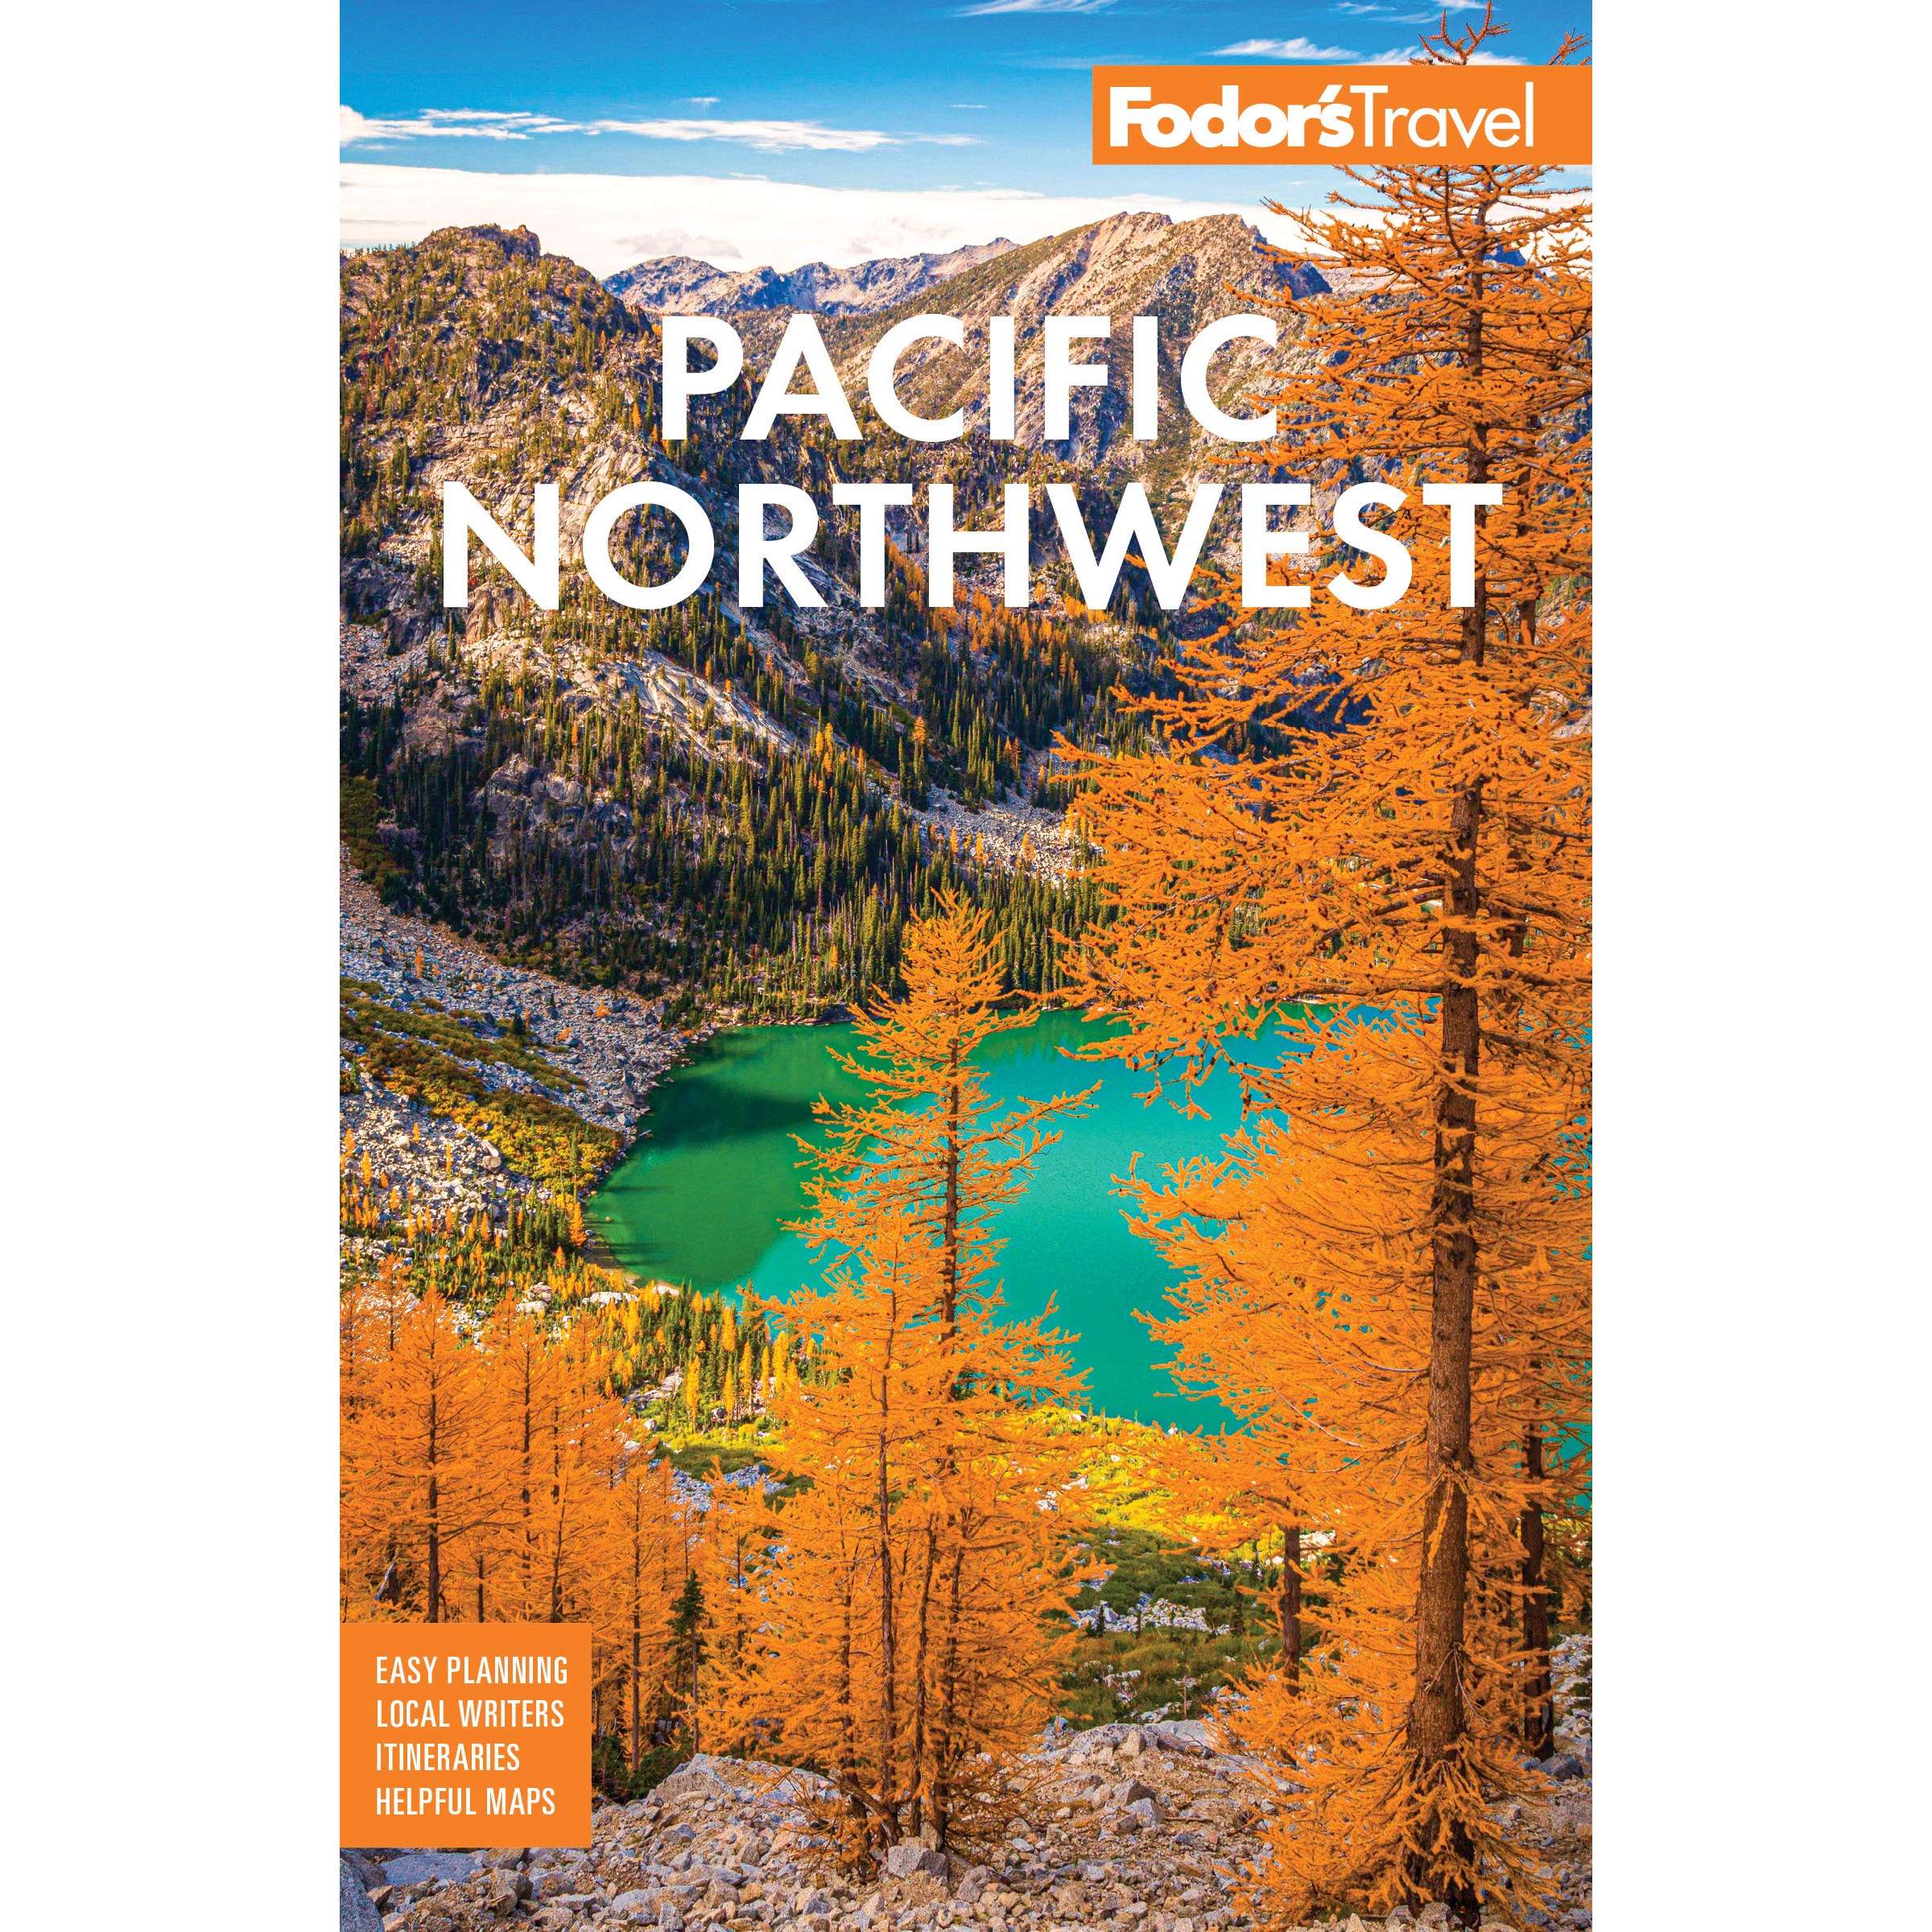 Recreation　the　Pacific　Coast　Northwest　Pacific　Northwest　Pacific　Northwest　Coast　Fodor's　Coast　::　Vancouver,　Seattle,　::　Pacific　::　Best　All　Northwest:　Books　Pacific　Pacific　Portland,　Pacific　Travel